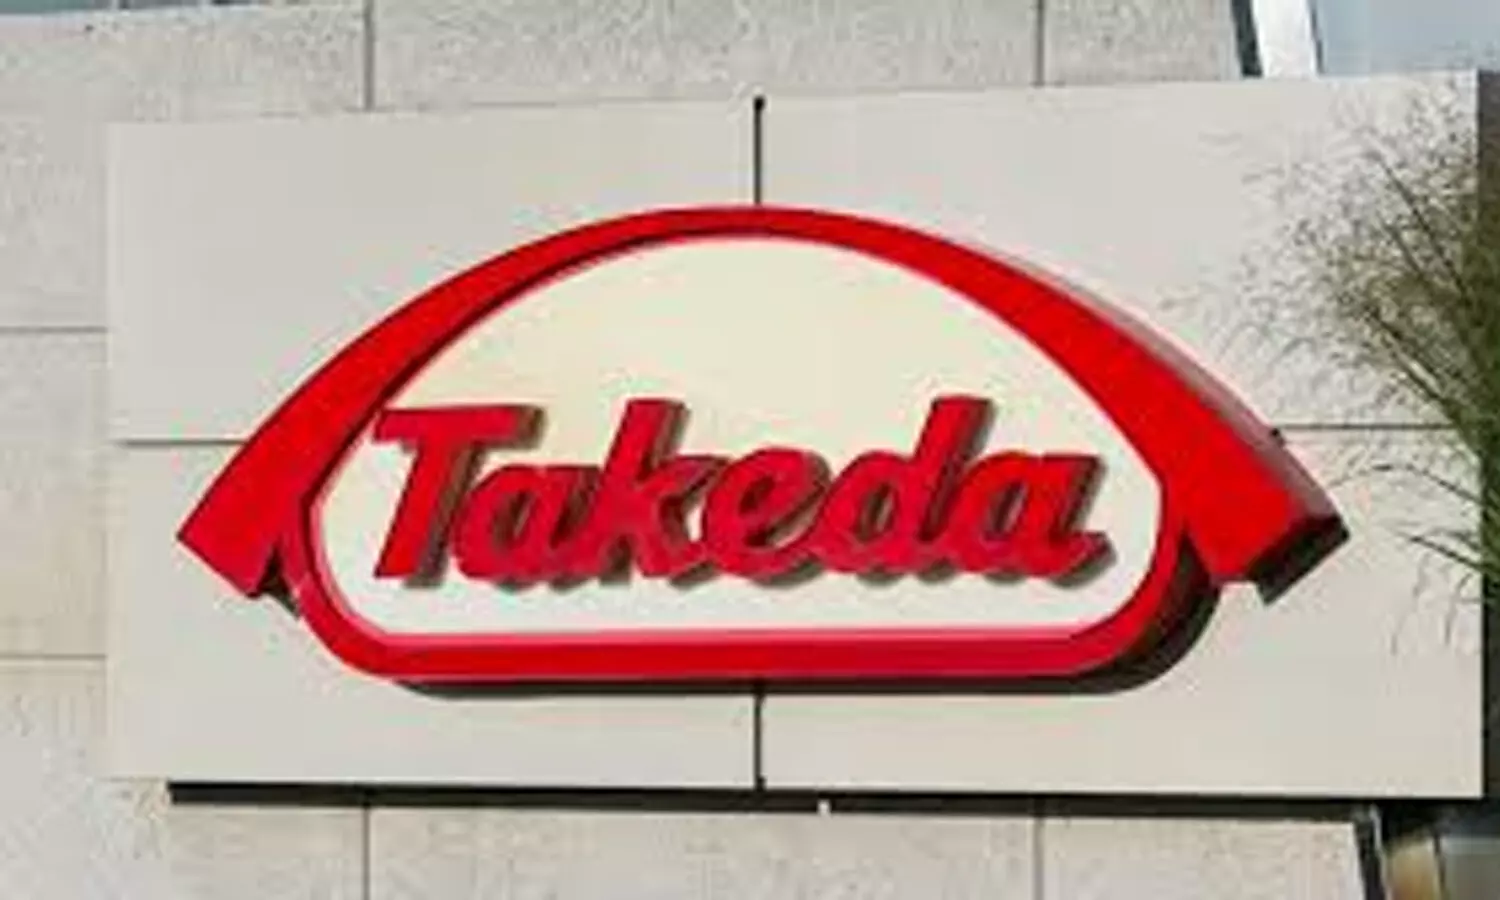 Banking on dengue, COVID-19 shots progress, Takeda CEO eyes vaccine business growth